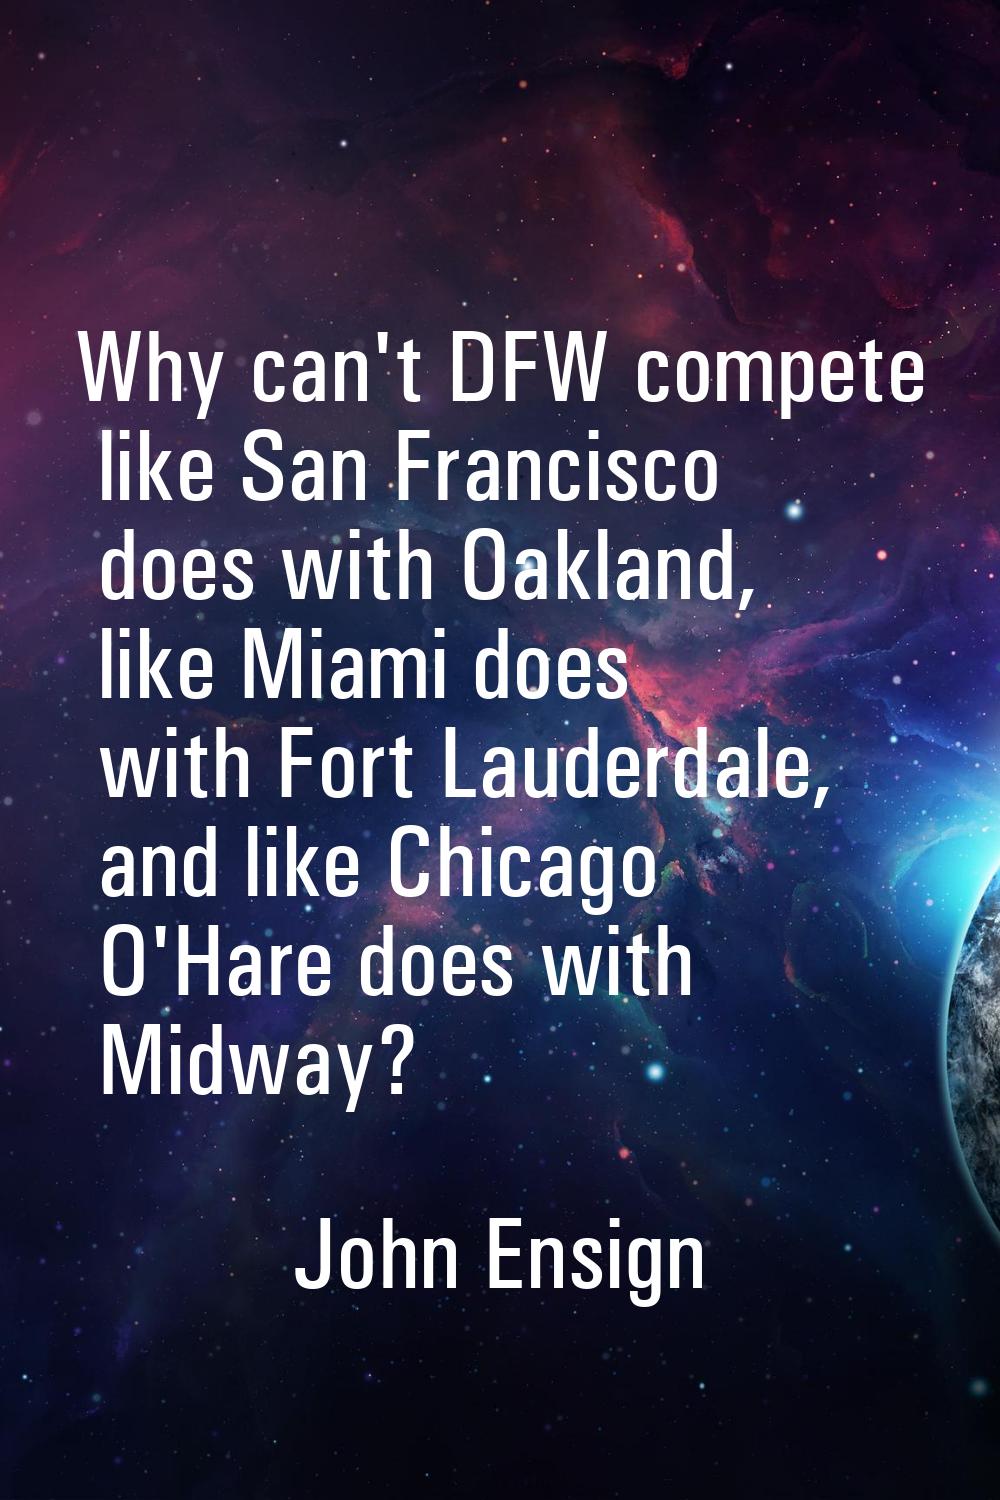 Why can't DFW compete like San Francisco does with Oakland, like Miami does with Fort Lauderdale, a